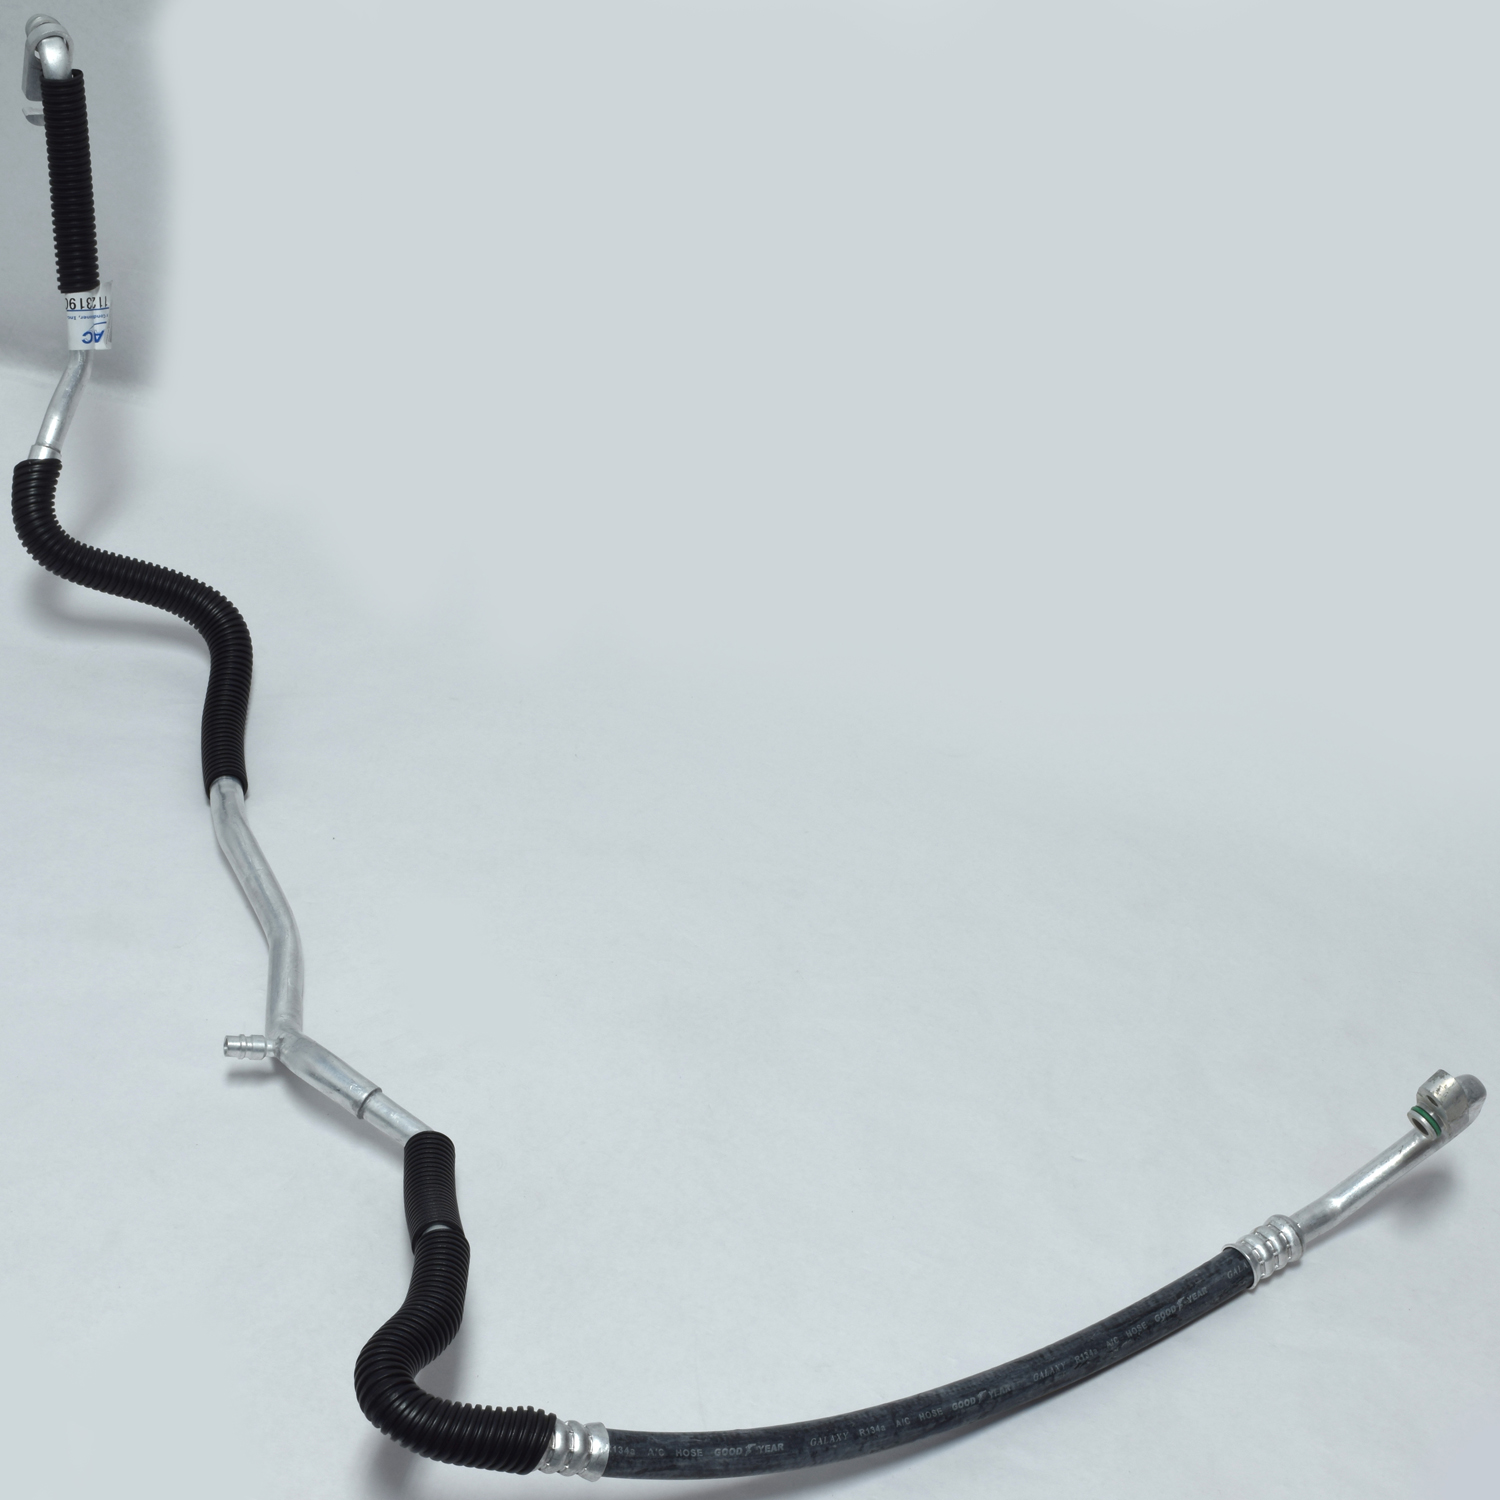 New Suction Line 755-870-011 Product Image field_60b6a13a6e67c